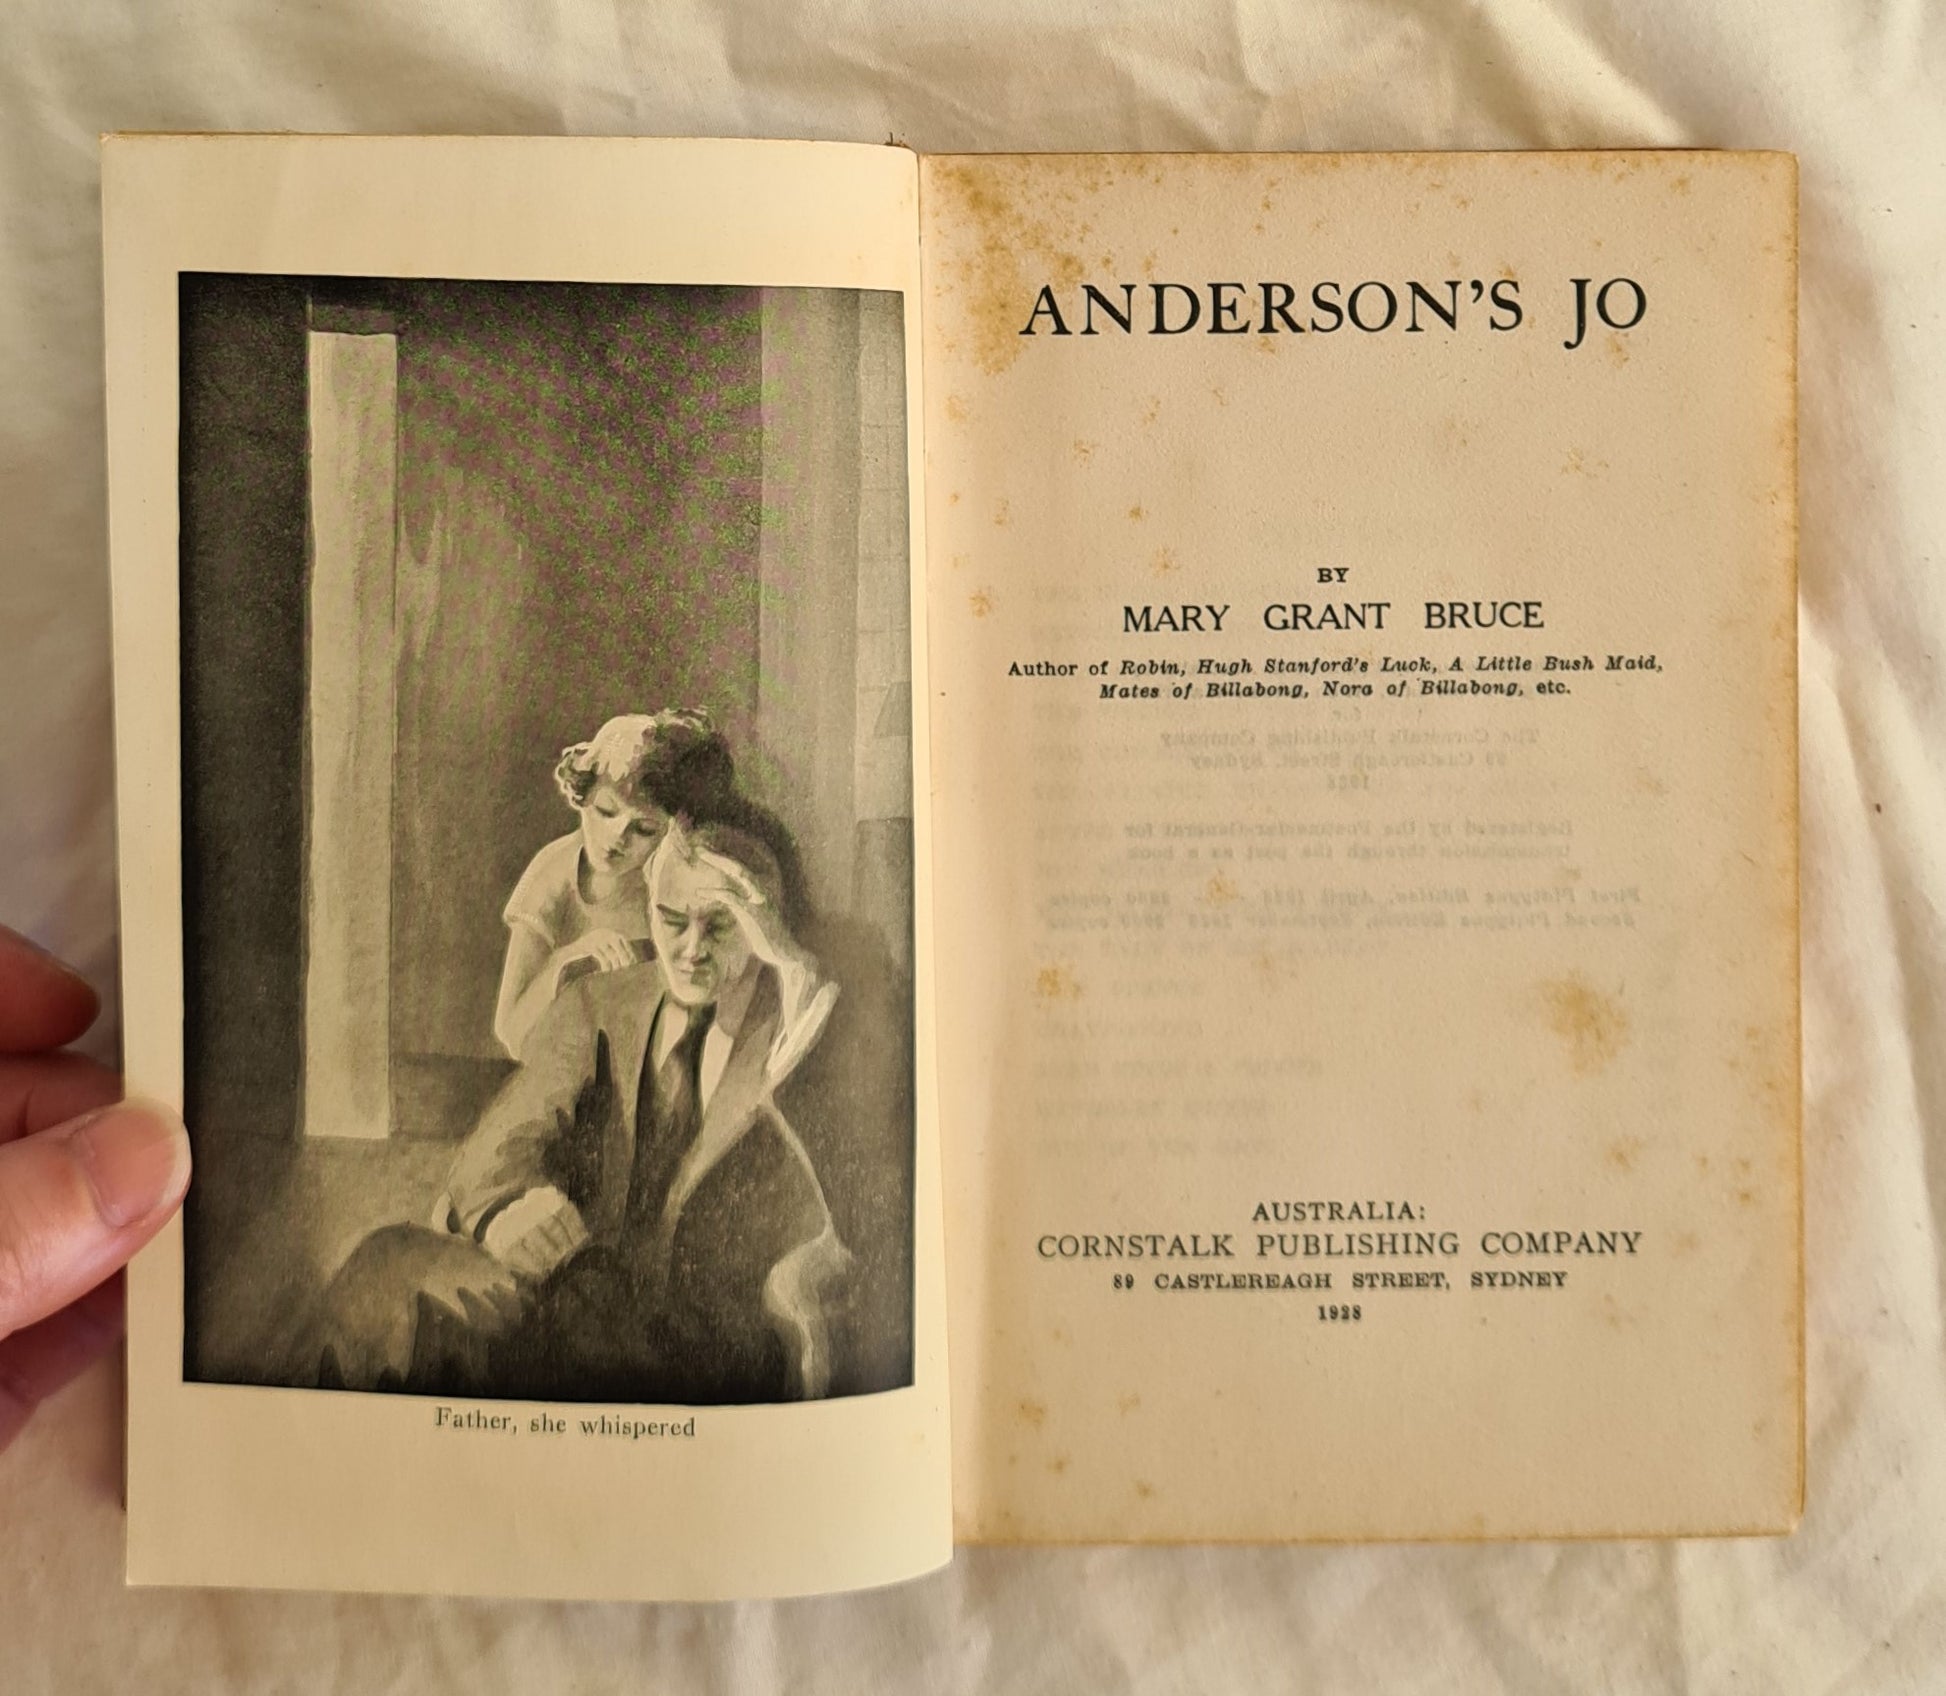 Anderson’s Jo by Mary Grant Bruce